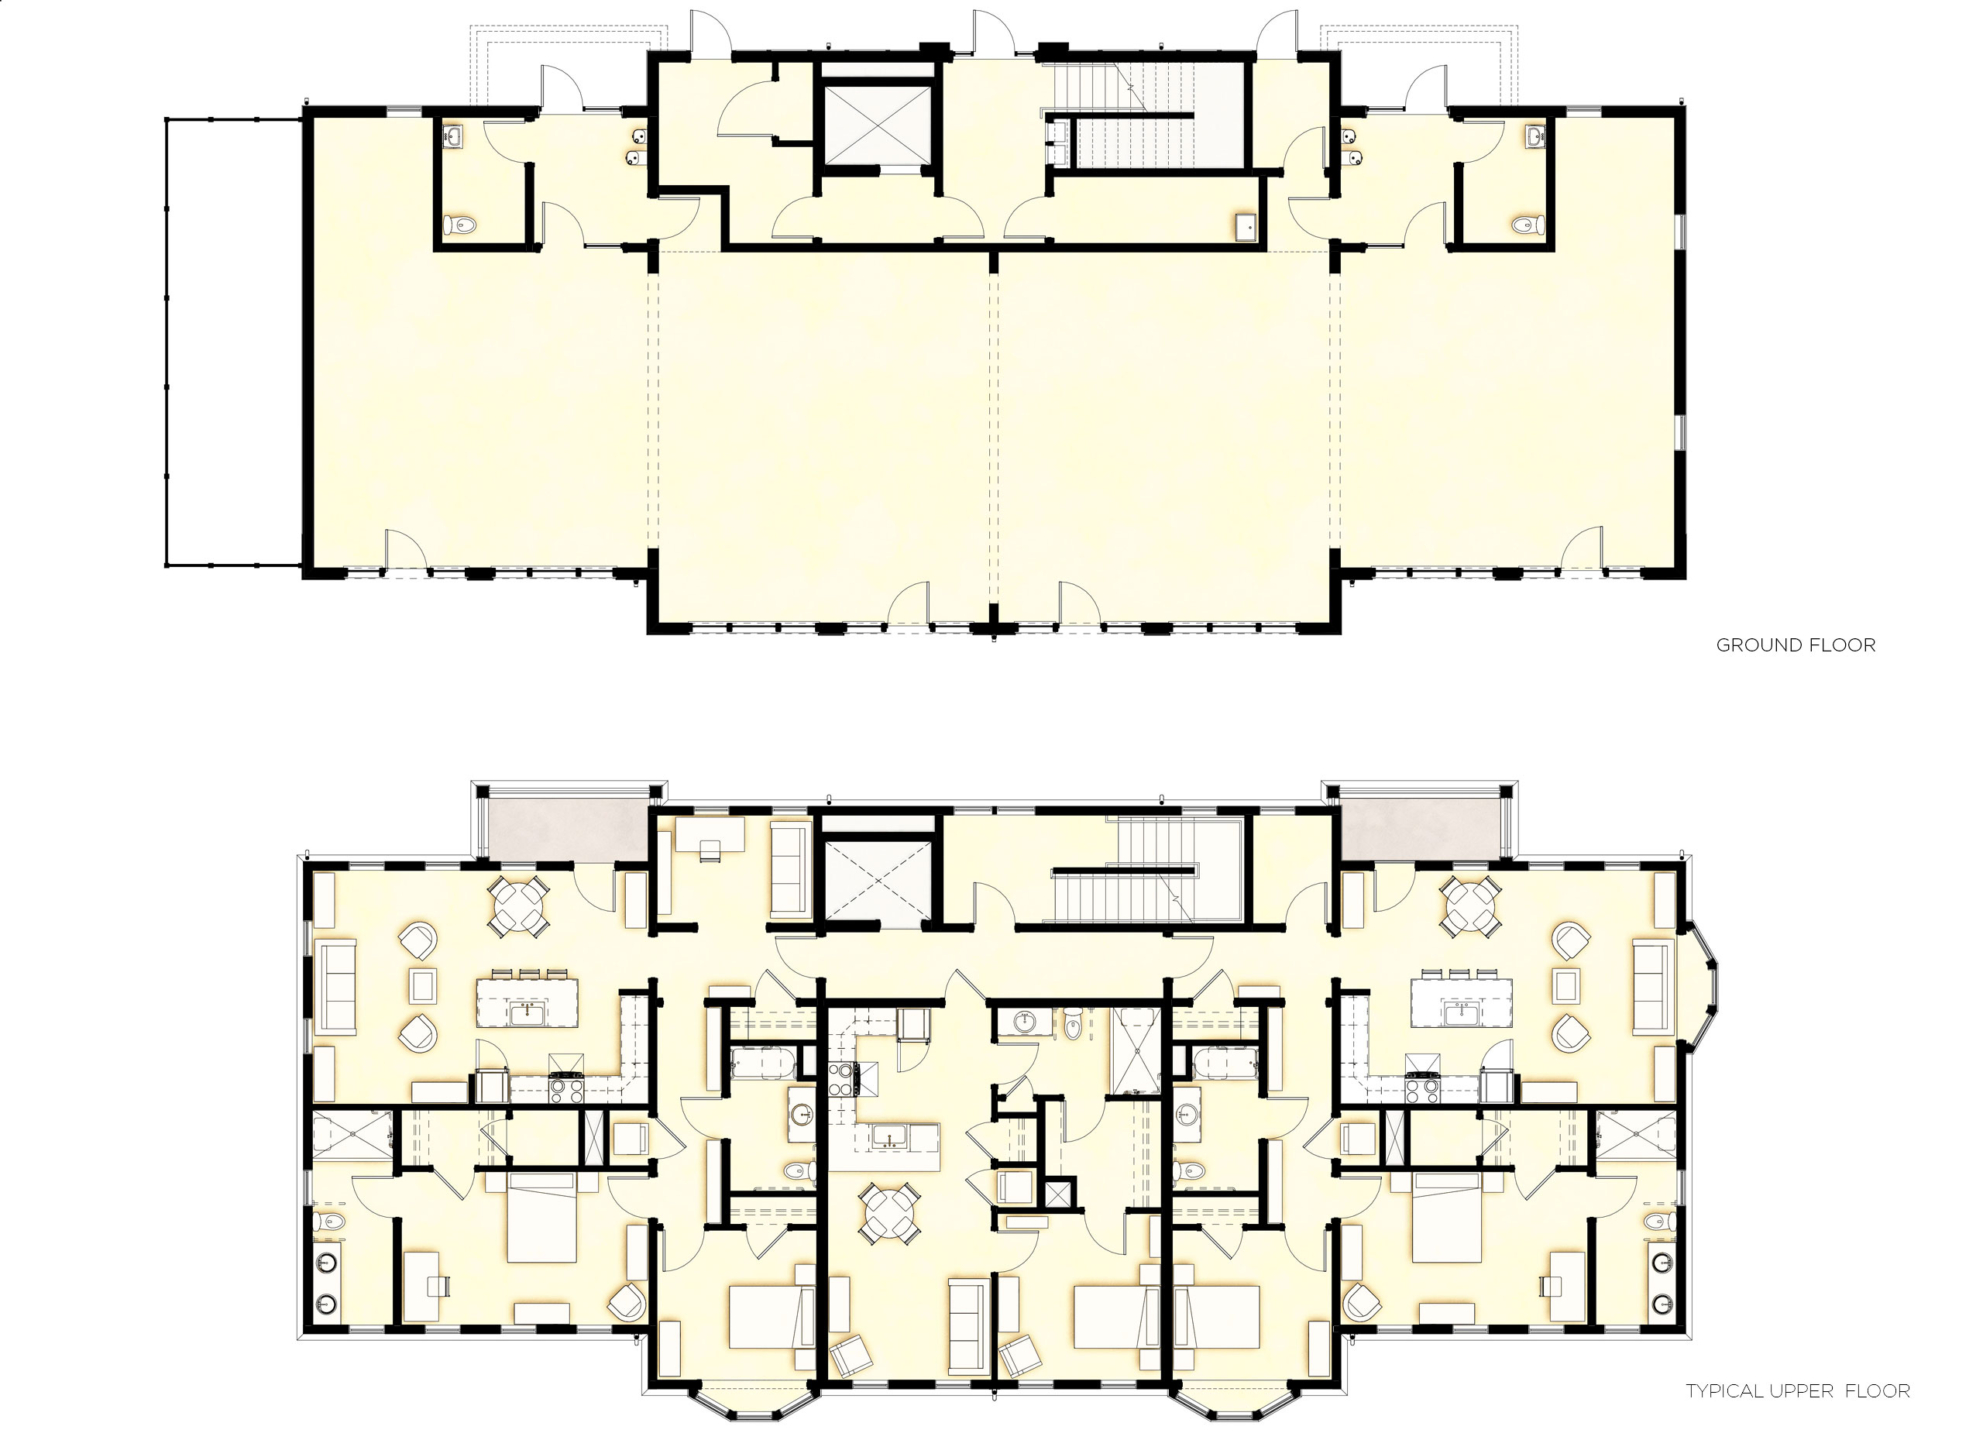 Floor plans of commercial space and typical residential floor.